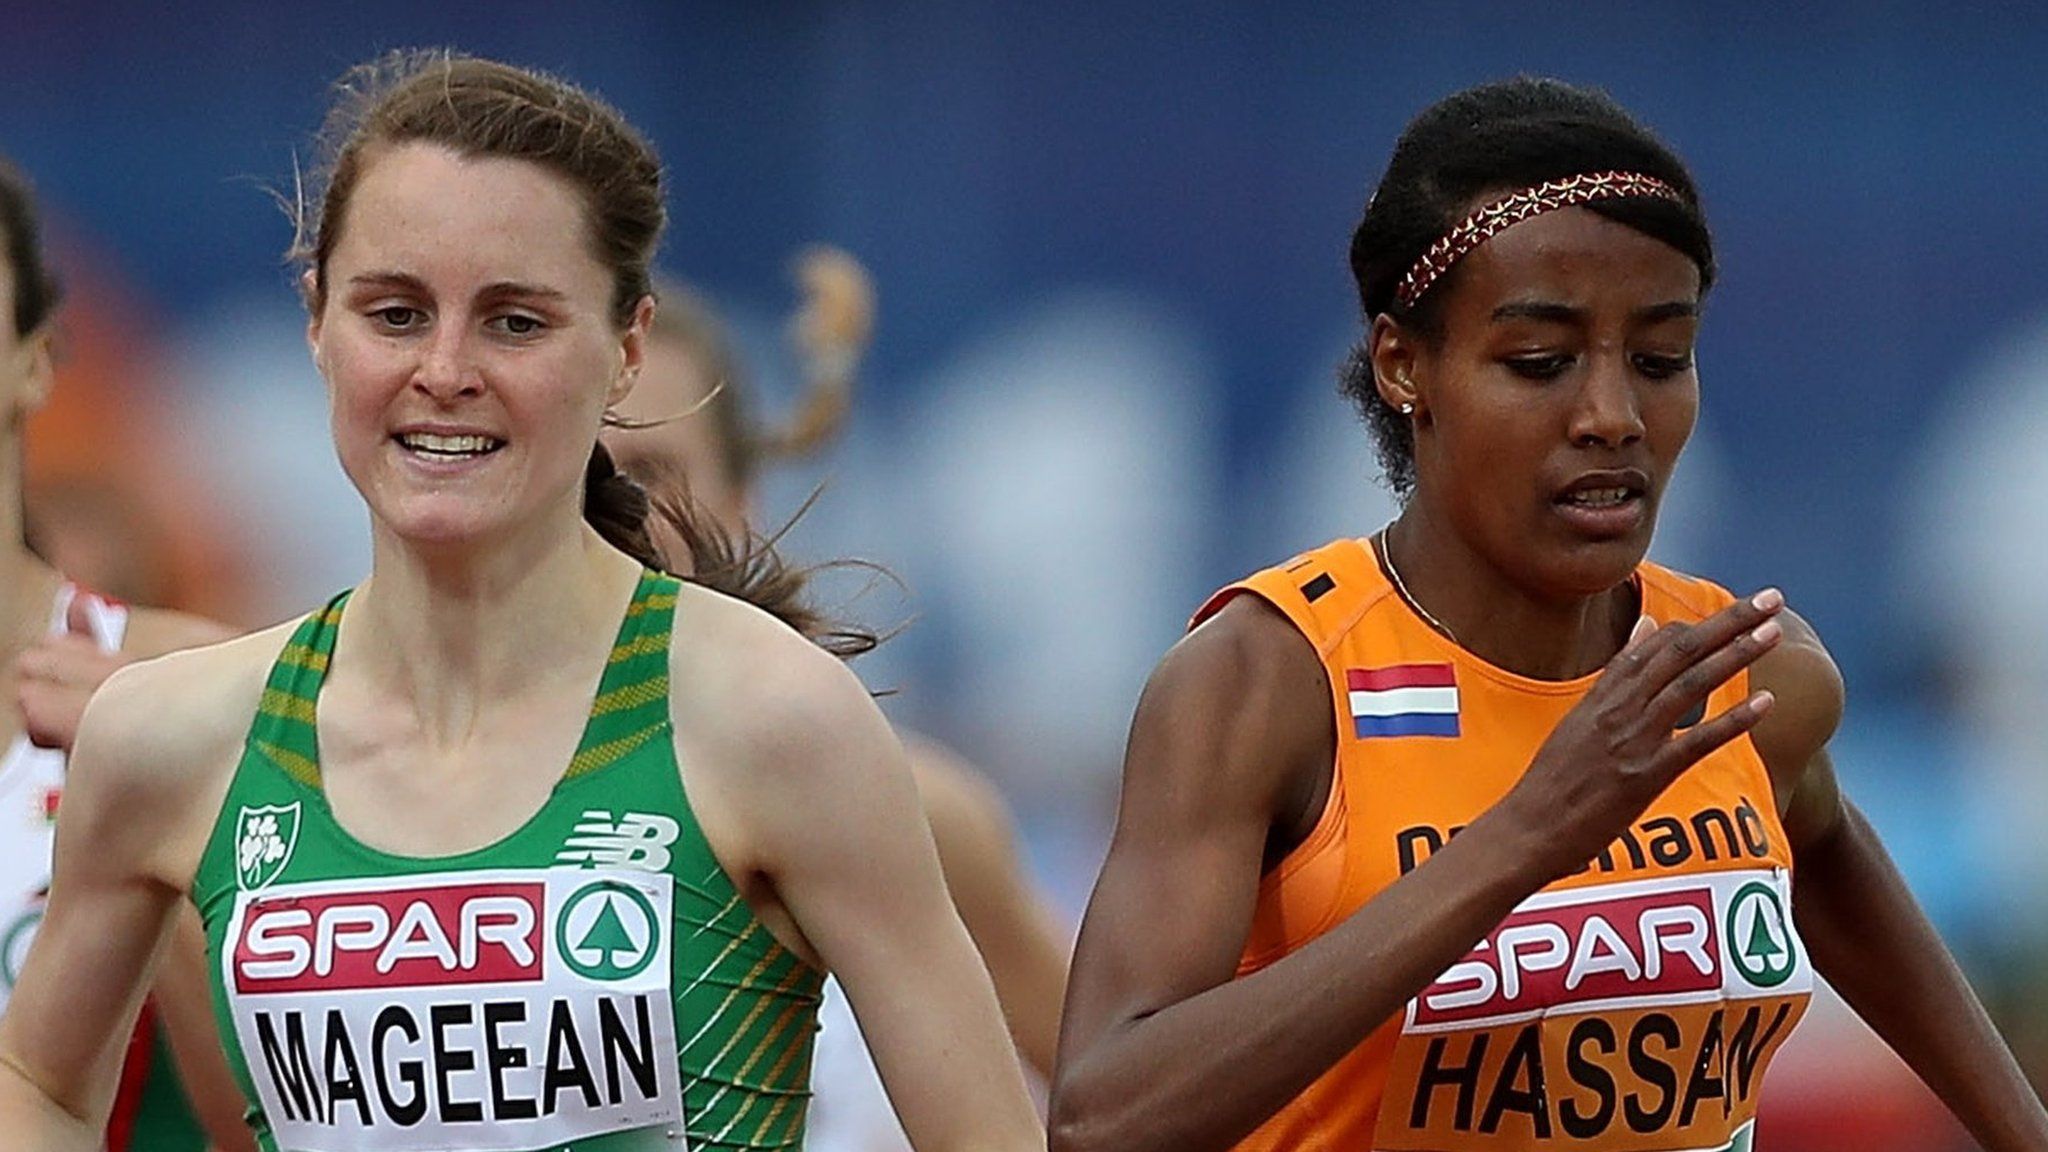 Ciara Mageean finished just behind gold medal favourite Sifan Hassan in the 1500m heat